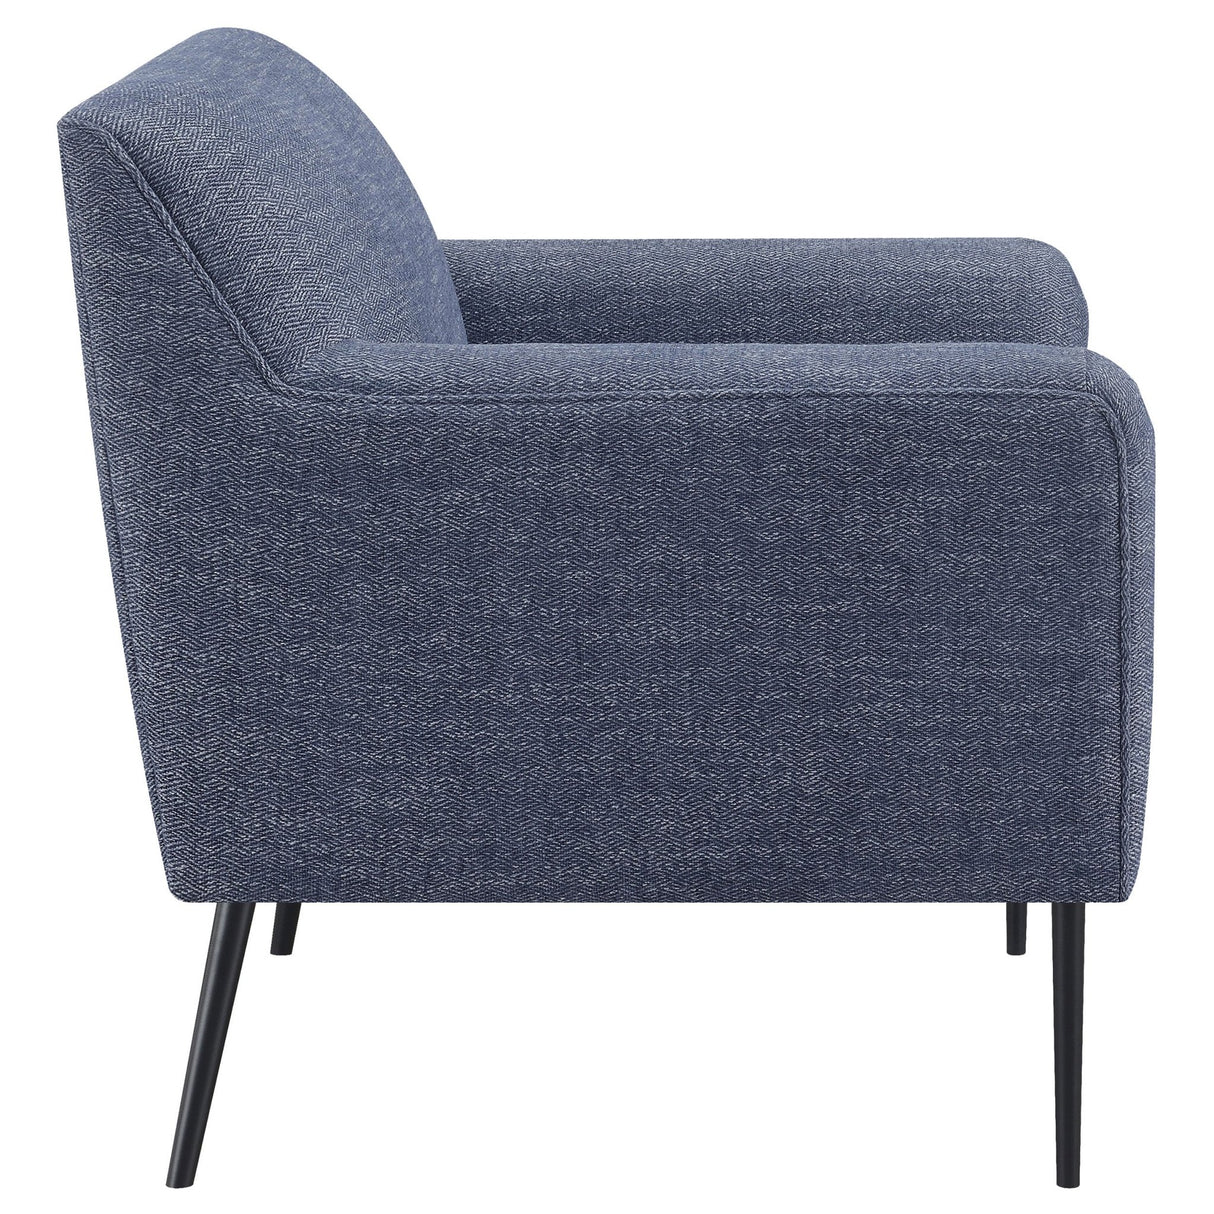 Accent Chair - Darlene Upholstered Tight Back Accent Chair Navy Blue - Accent Chairs - 905641 - image - 4